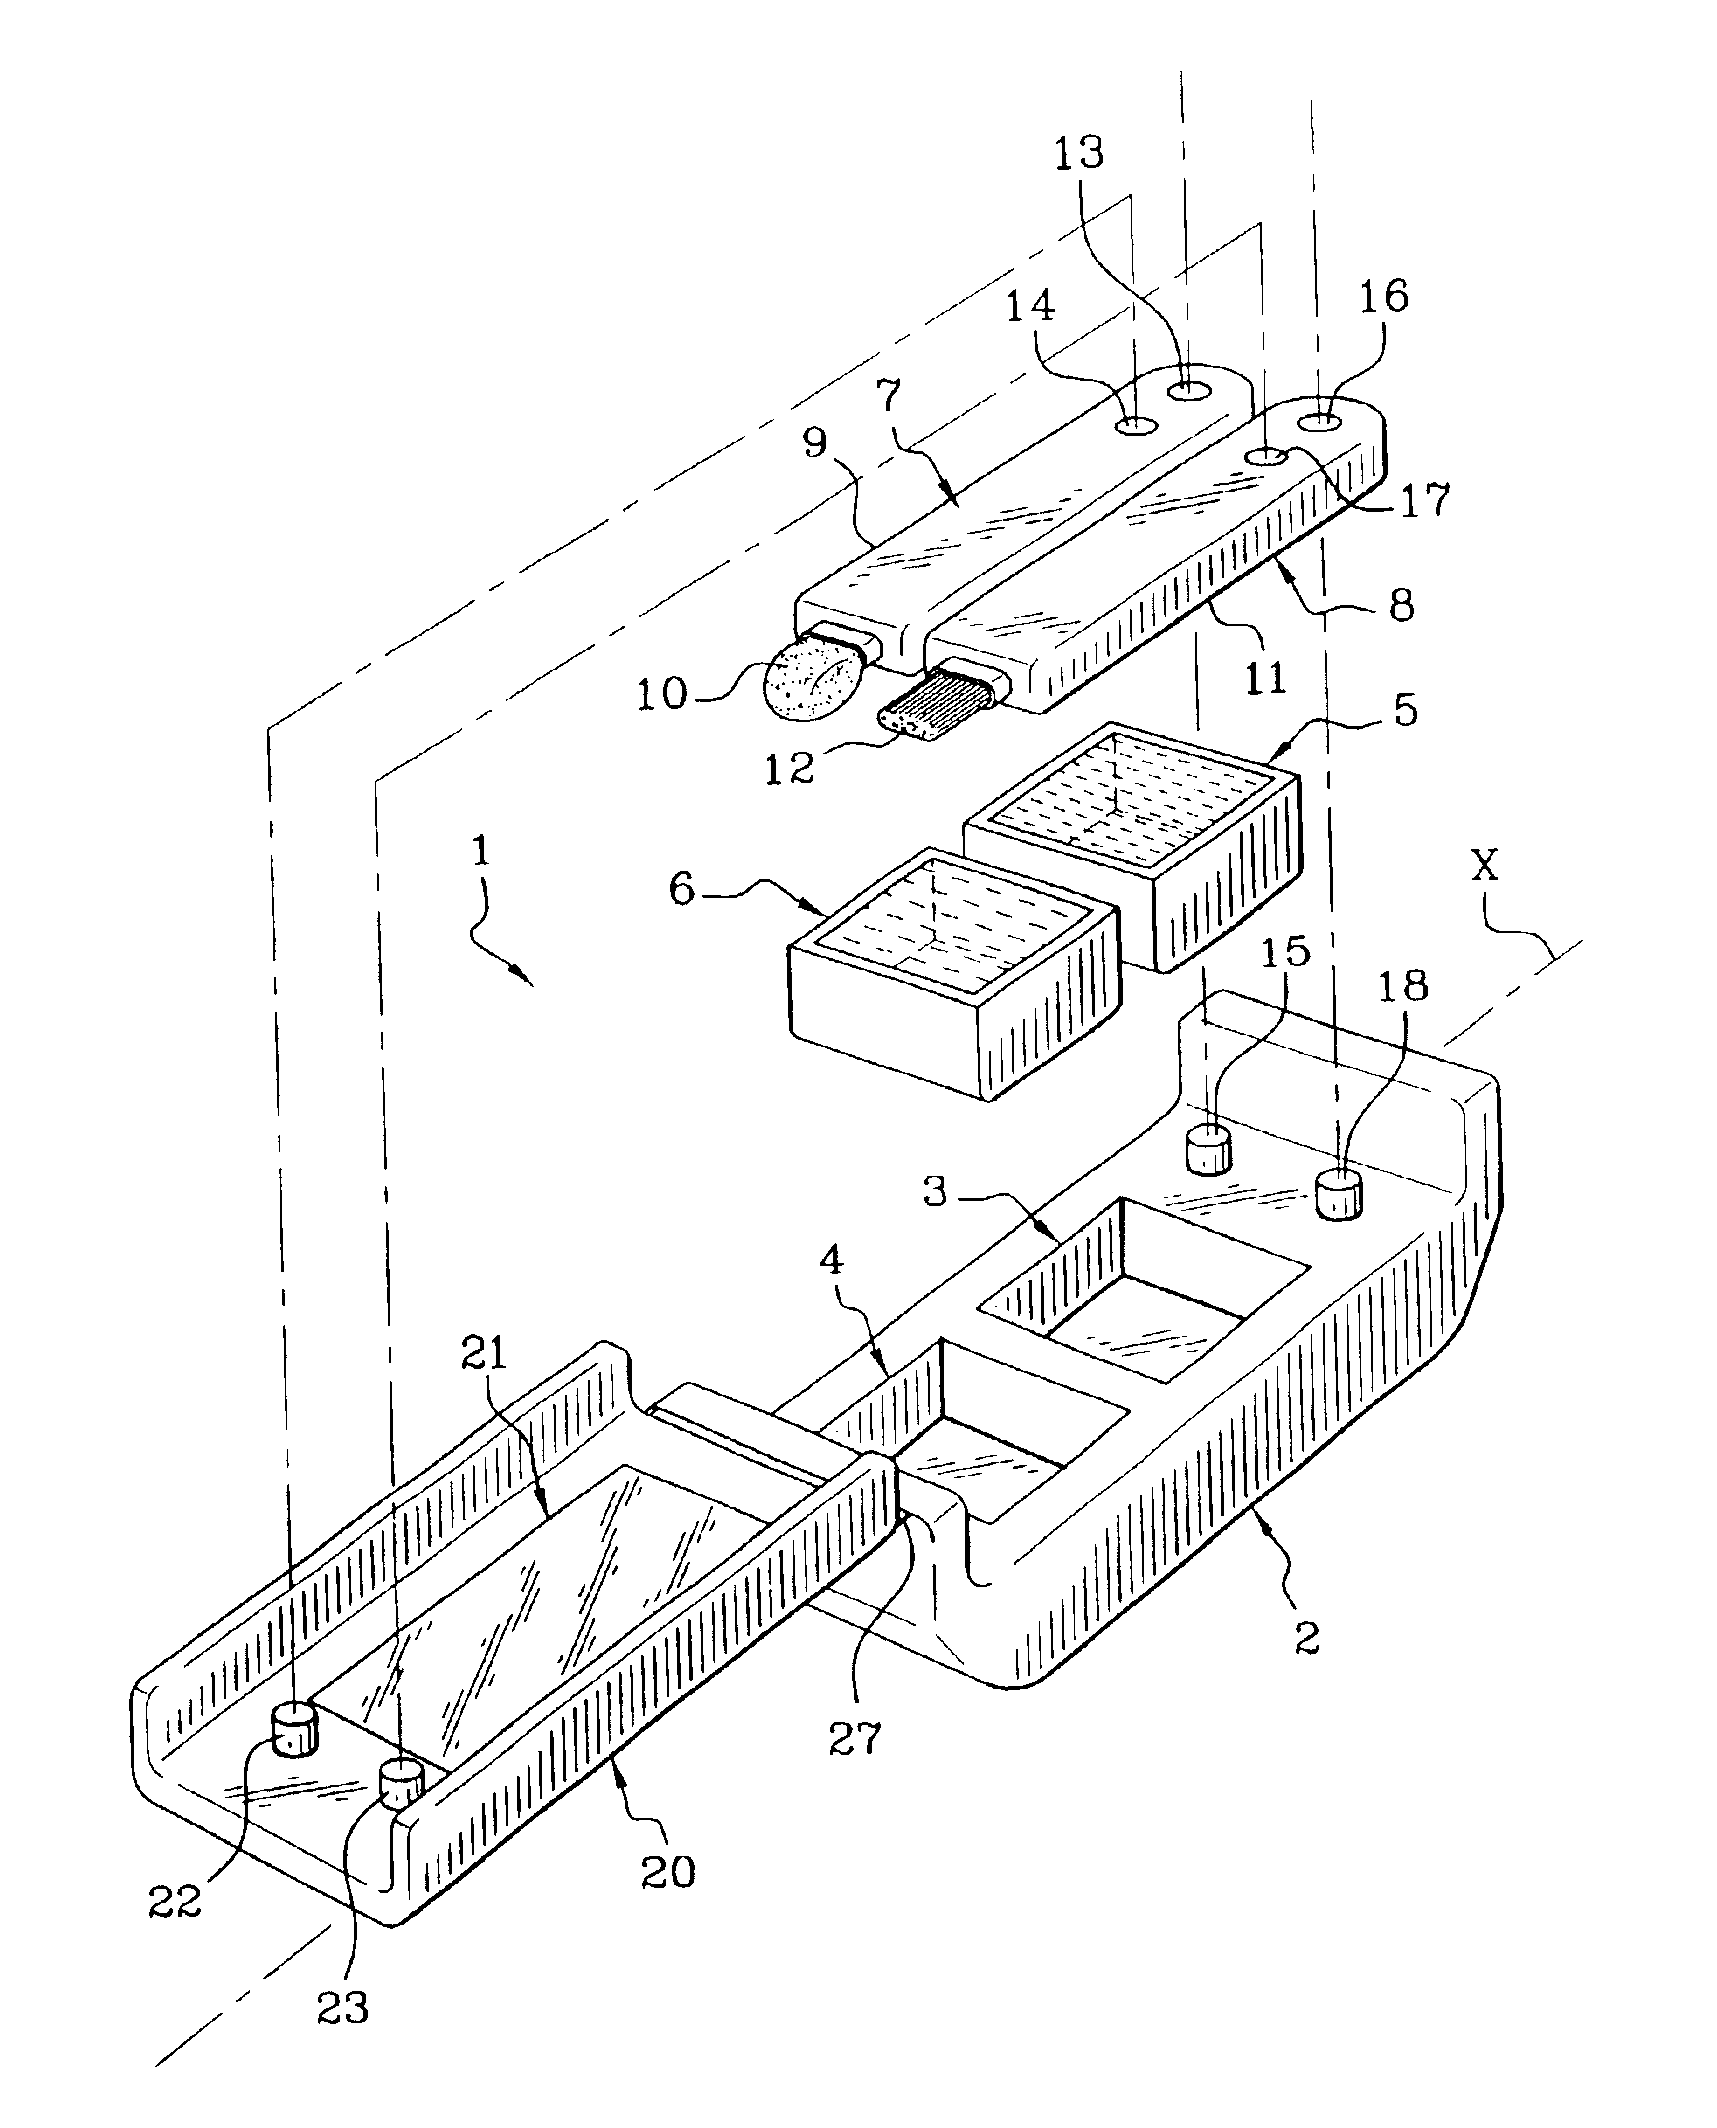 Assembly for packaging and application of a product, in particular a make-up product